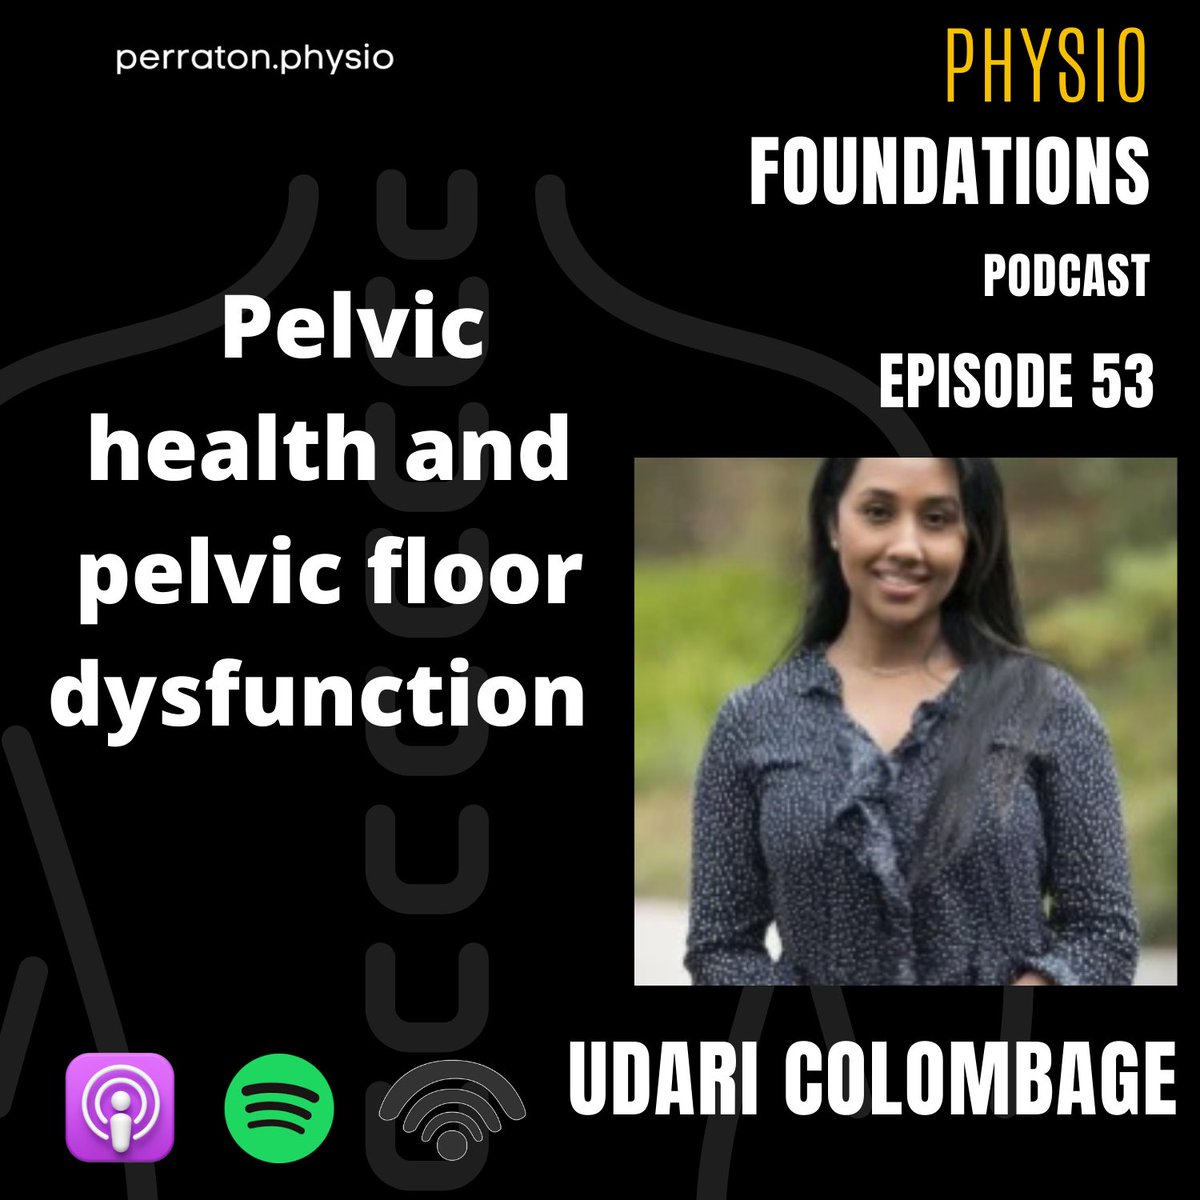 Dr Udari Colombage from Monash University Physiotherapy joined me on the Physio Foundations podcast this week to talk about pelvic health and pelvic floor dysfunction.

Thanks Udari for a great conversation 

#pelvichealth #pelvicfloorphysicaltherapy #phdjourney